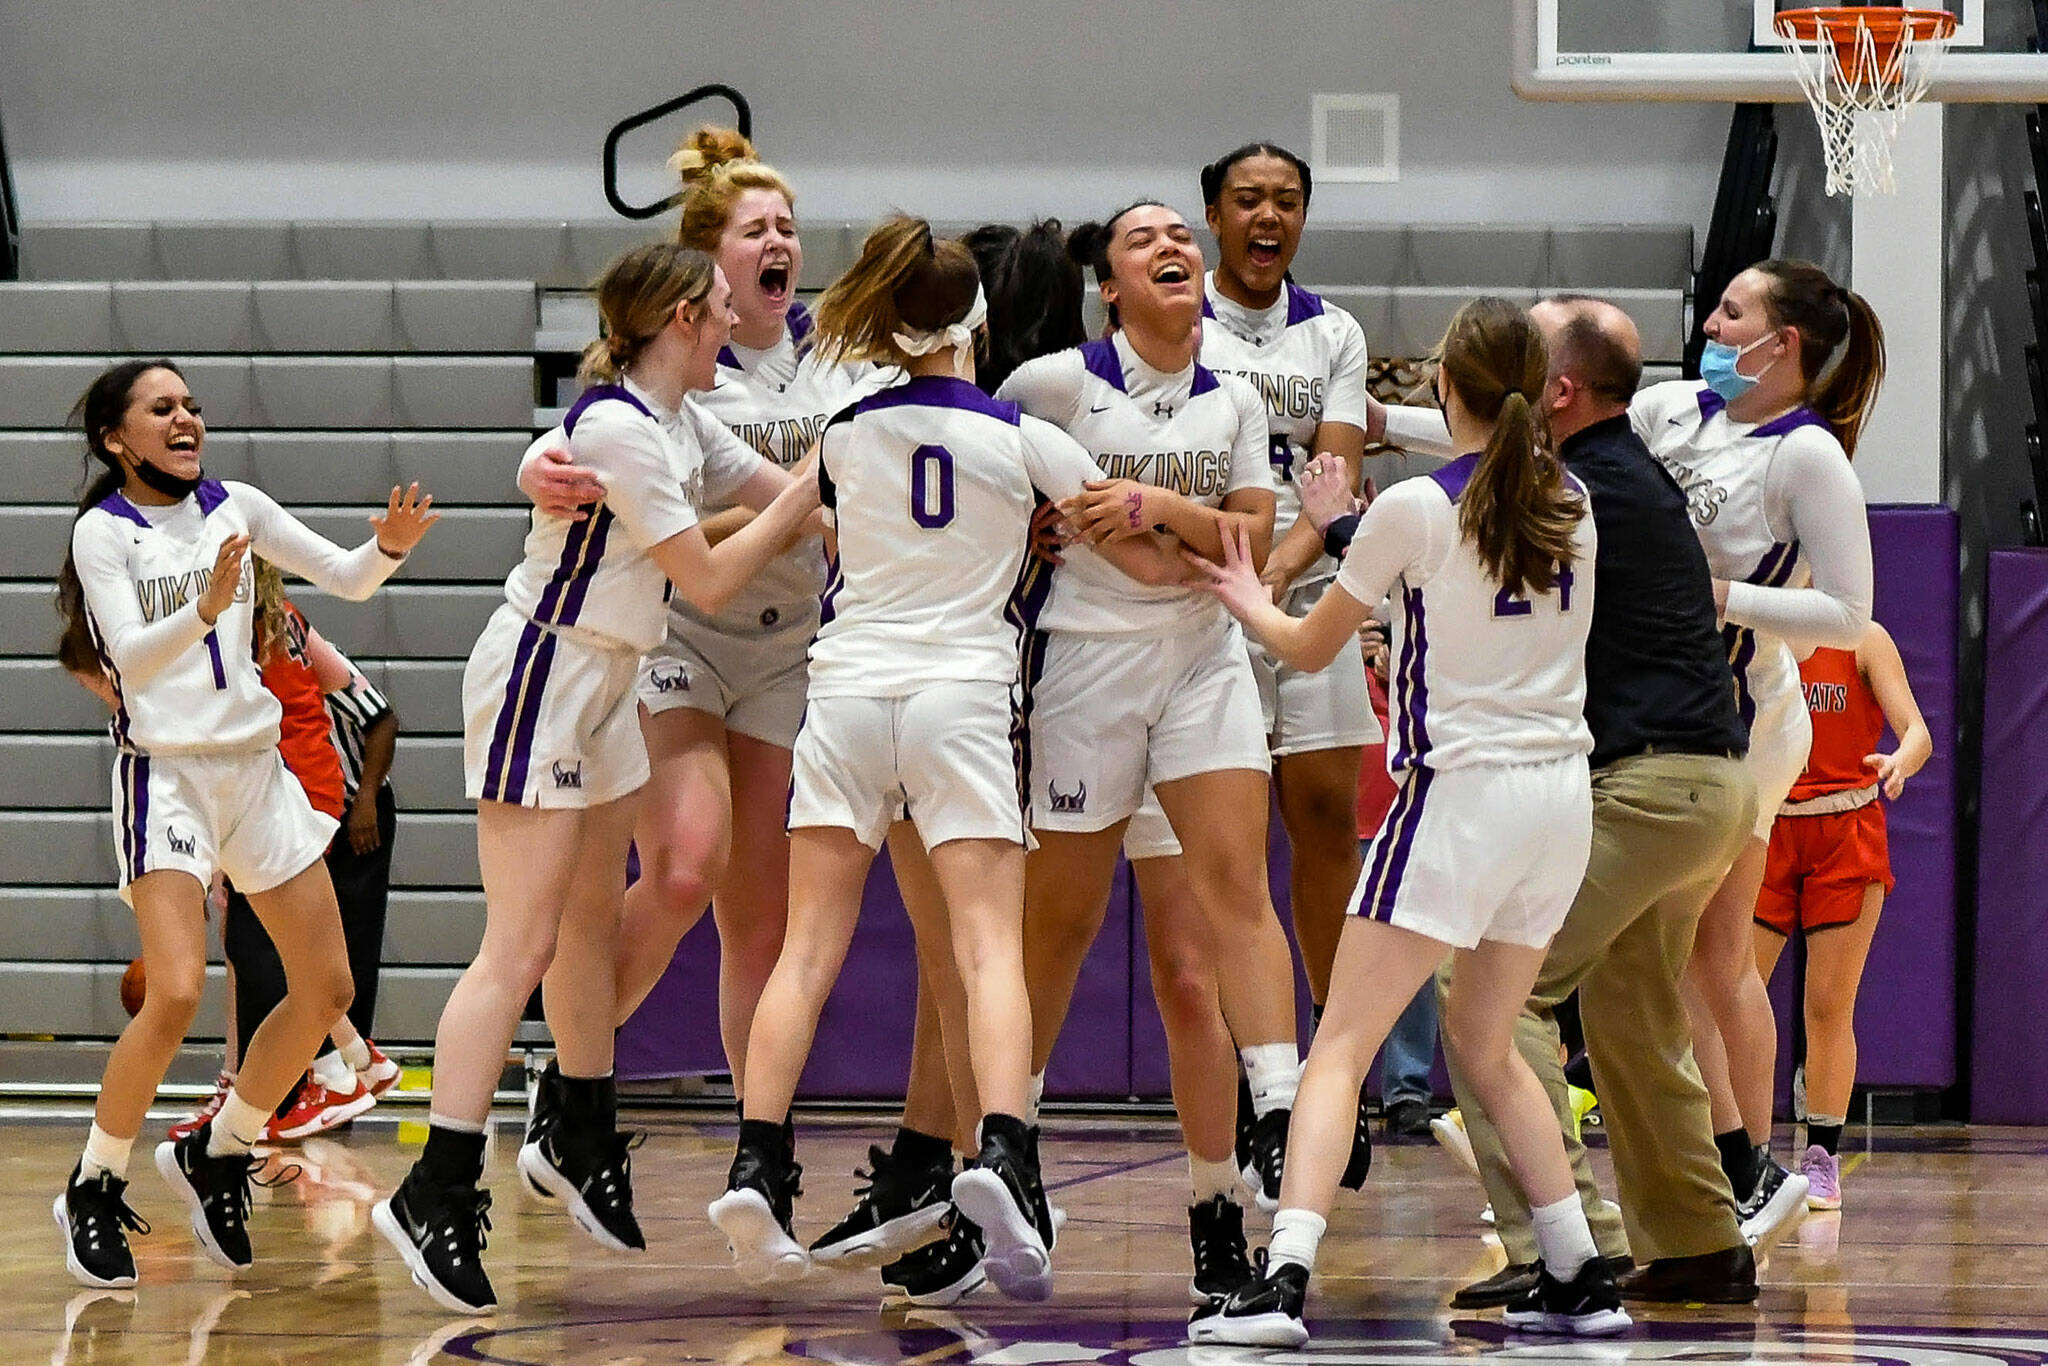 The Lake Stevens girls basketball team celebrates after beating Mount Si 58-57 in overtime of a 4A District 1/2 Tournament game on Friday, Feb. 11, 2022, at Lake Stevens High School. (John Gardner / Pro Action Image)